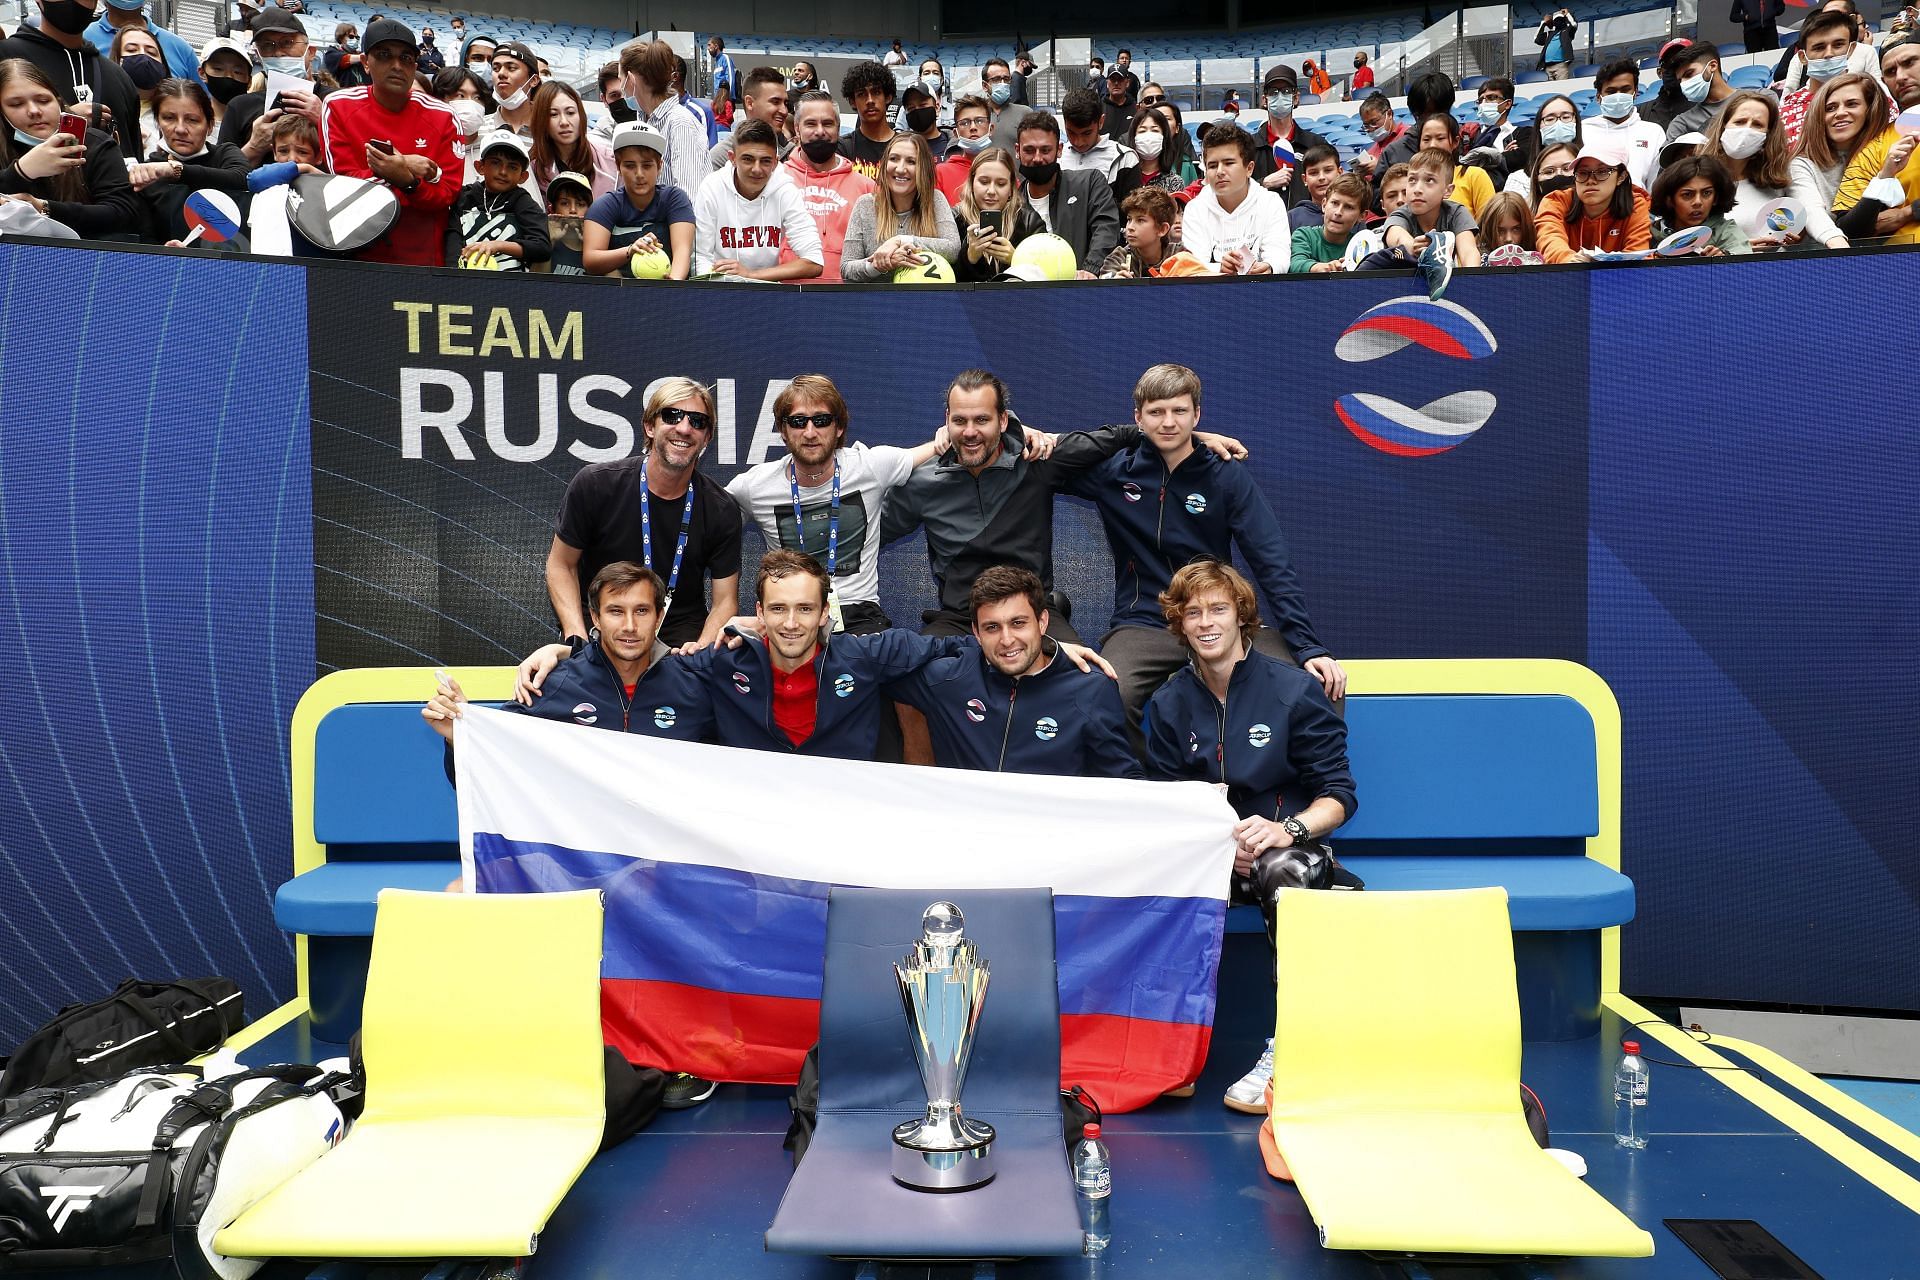 Defending champions Russia kick off their 2022 ATP Cup campaign against France on Day 2